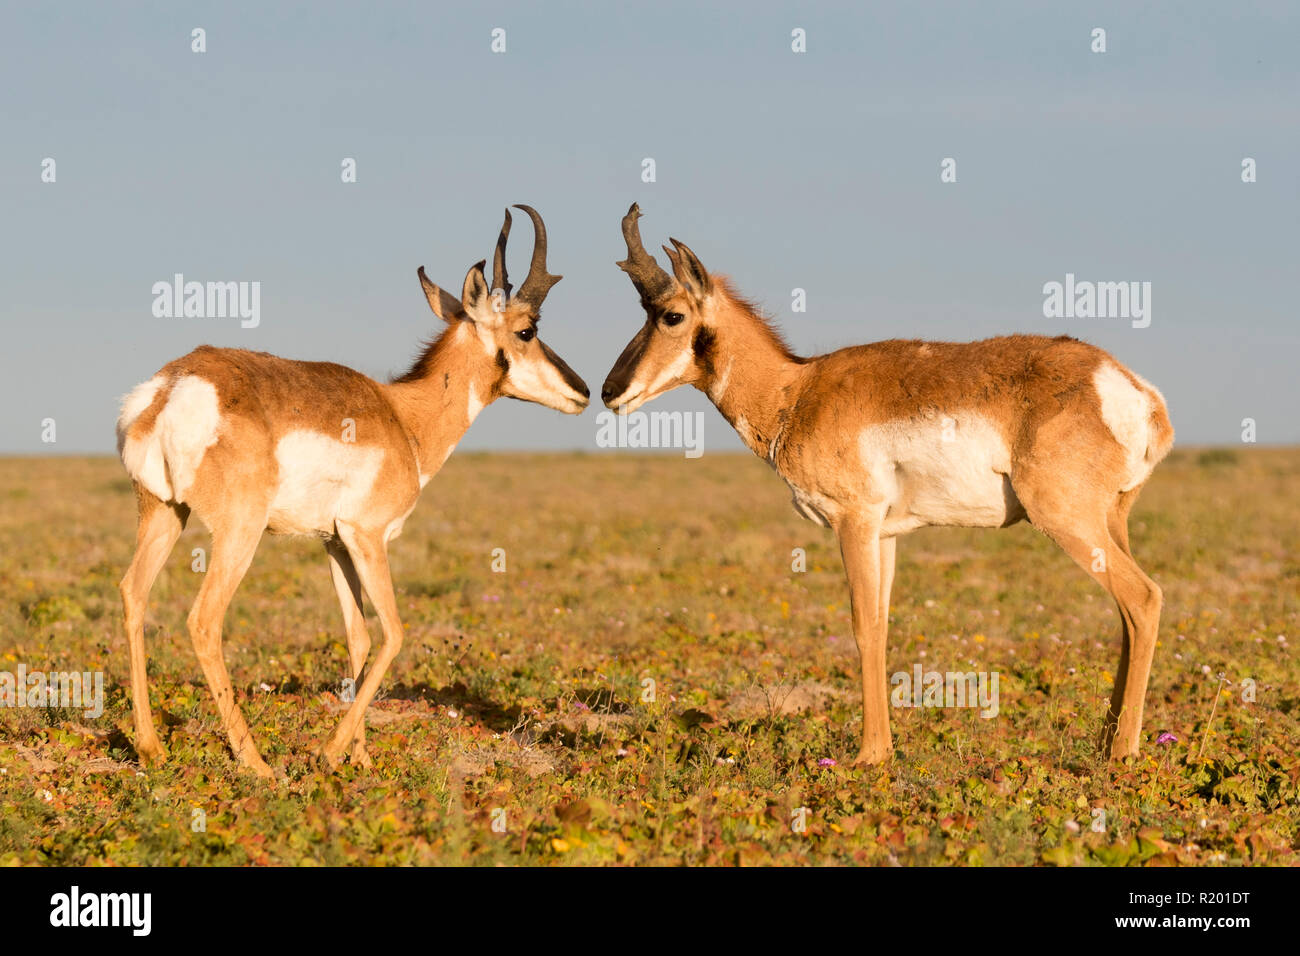 Baja California Pronghorn (Antilocapa americana peninsularis). Two adult males sniffing at each other. The wild population is estimated at 200. Mexico, Baja California Sur, Baja California Desert National Park Stock Photo